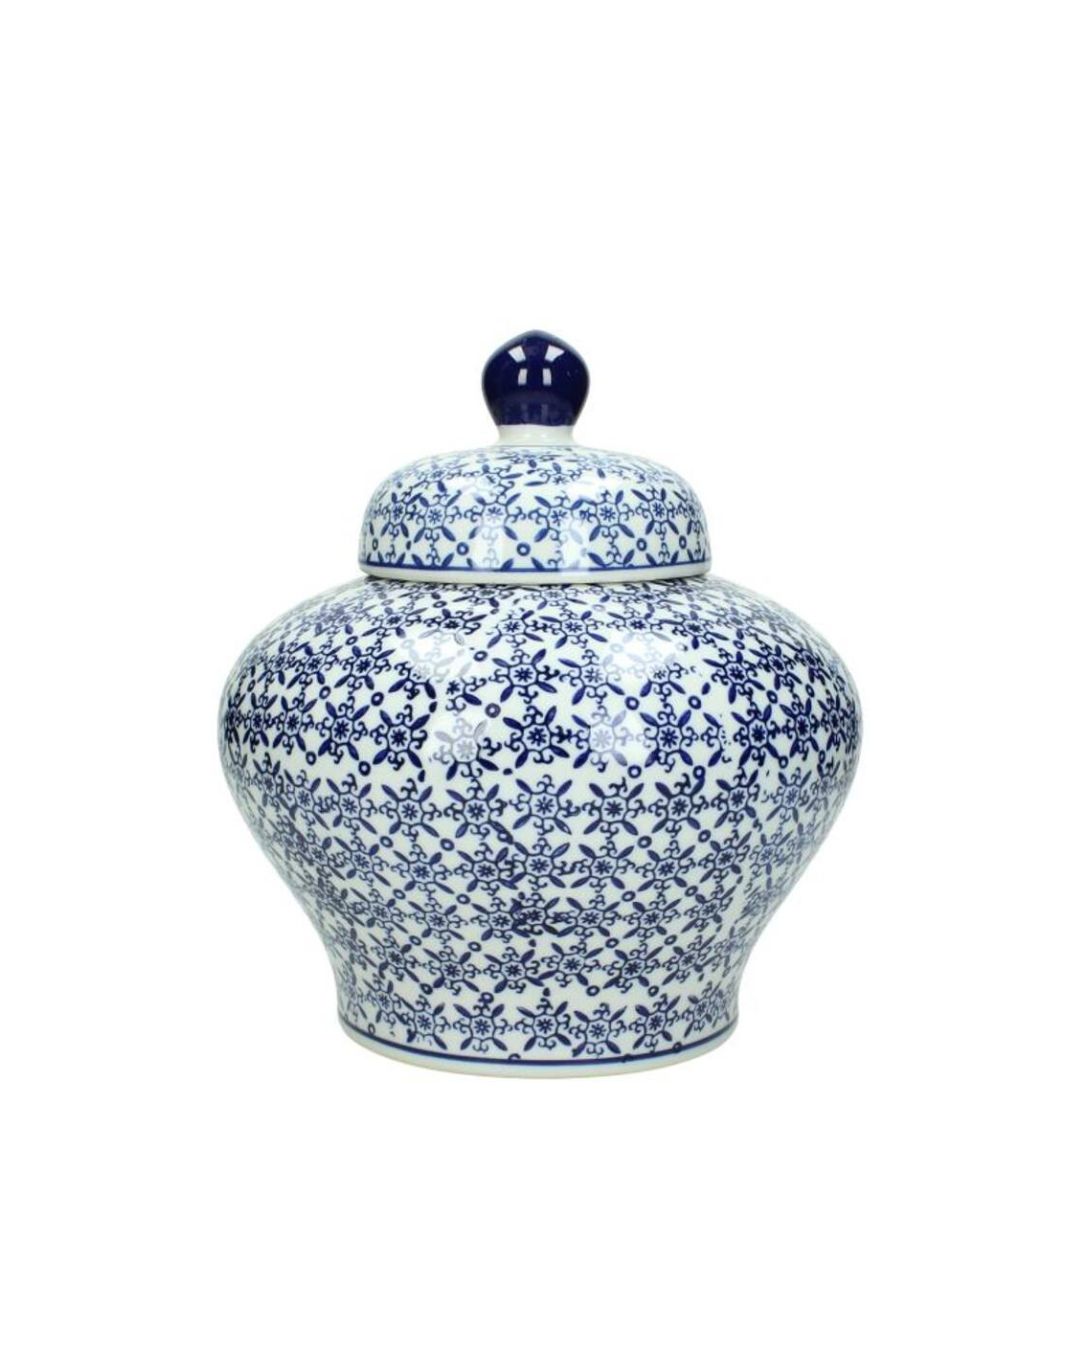 Blue And White Jar